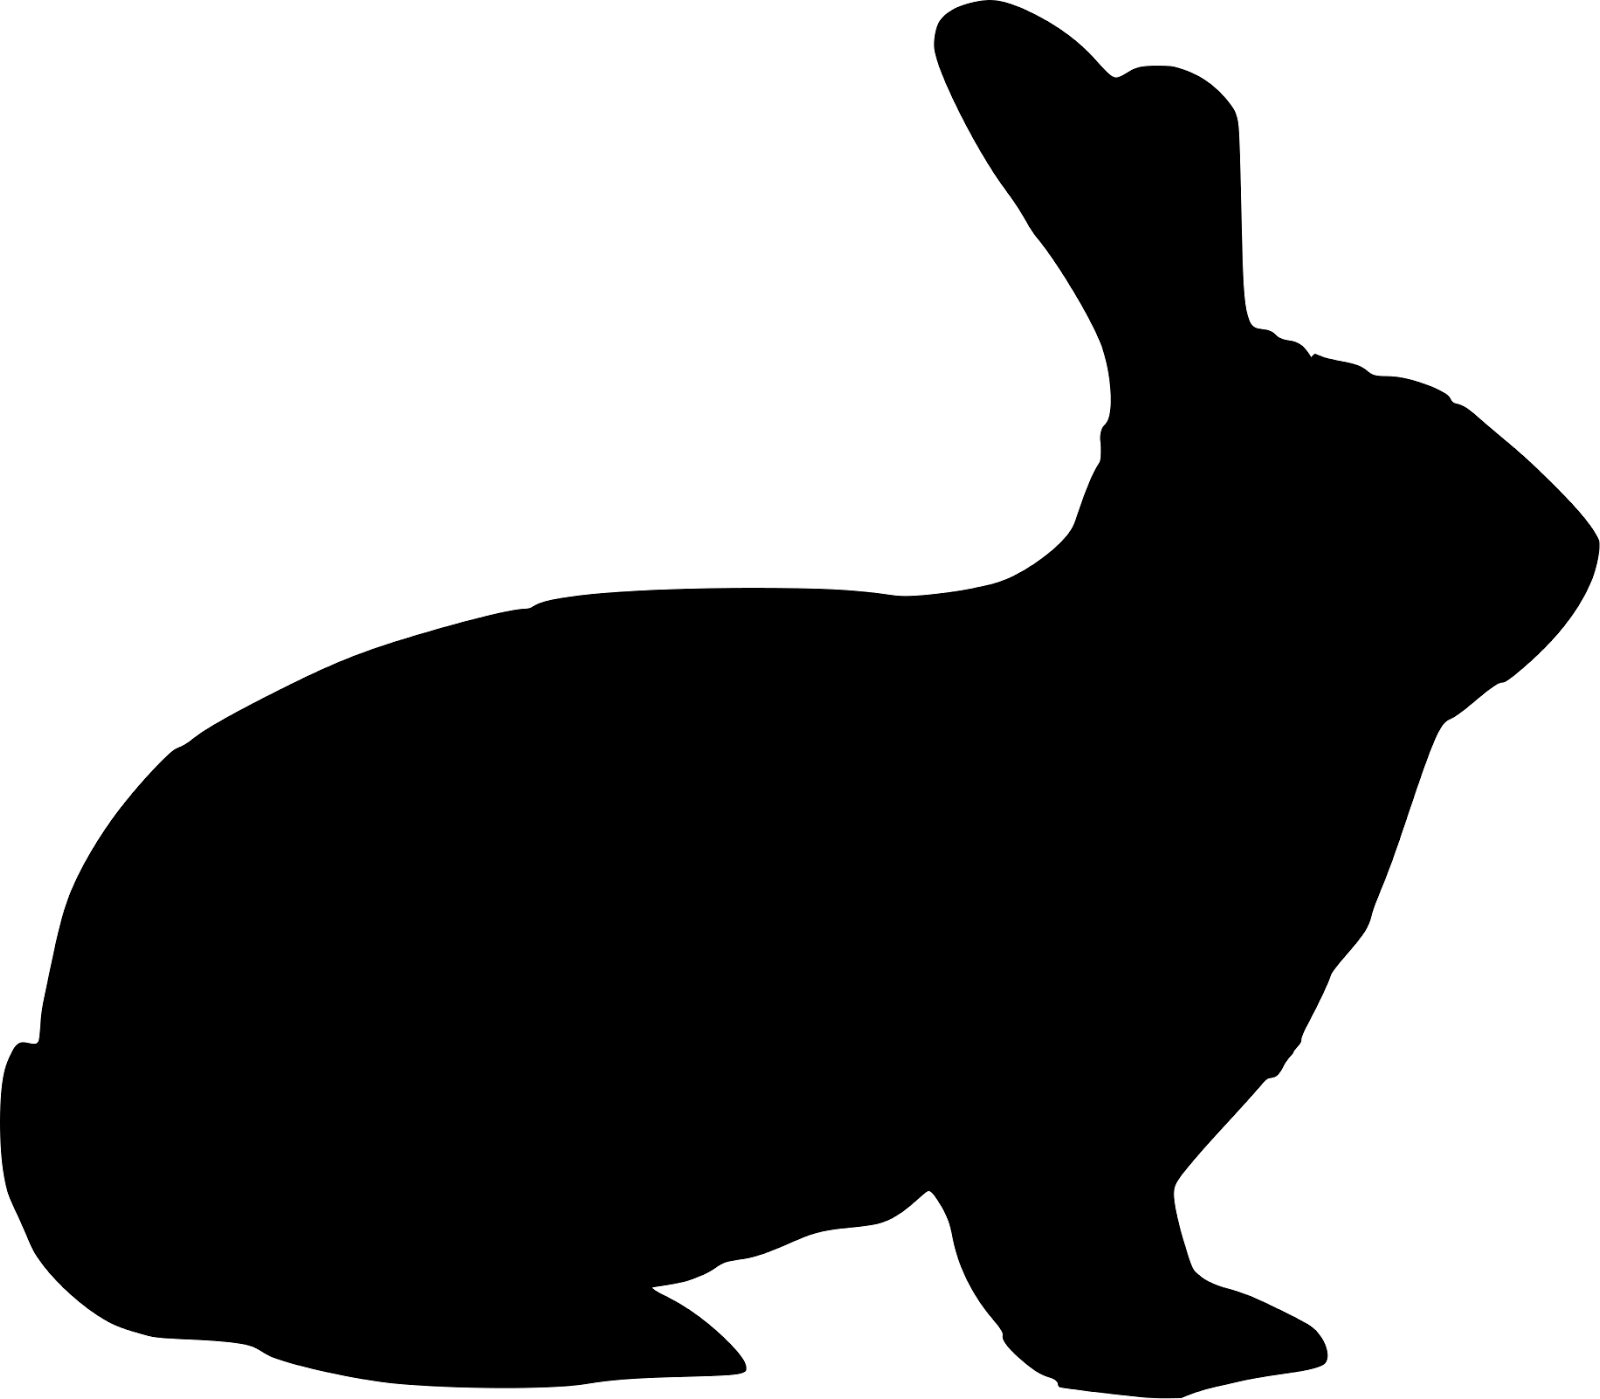 Rabbit Head Silhouette Images  Pictures - Becuo